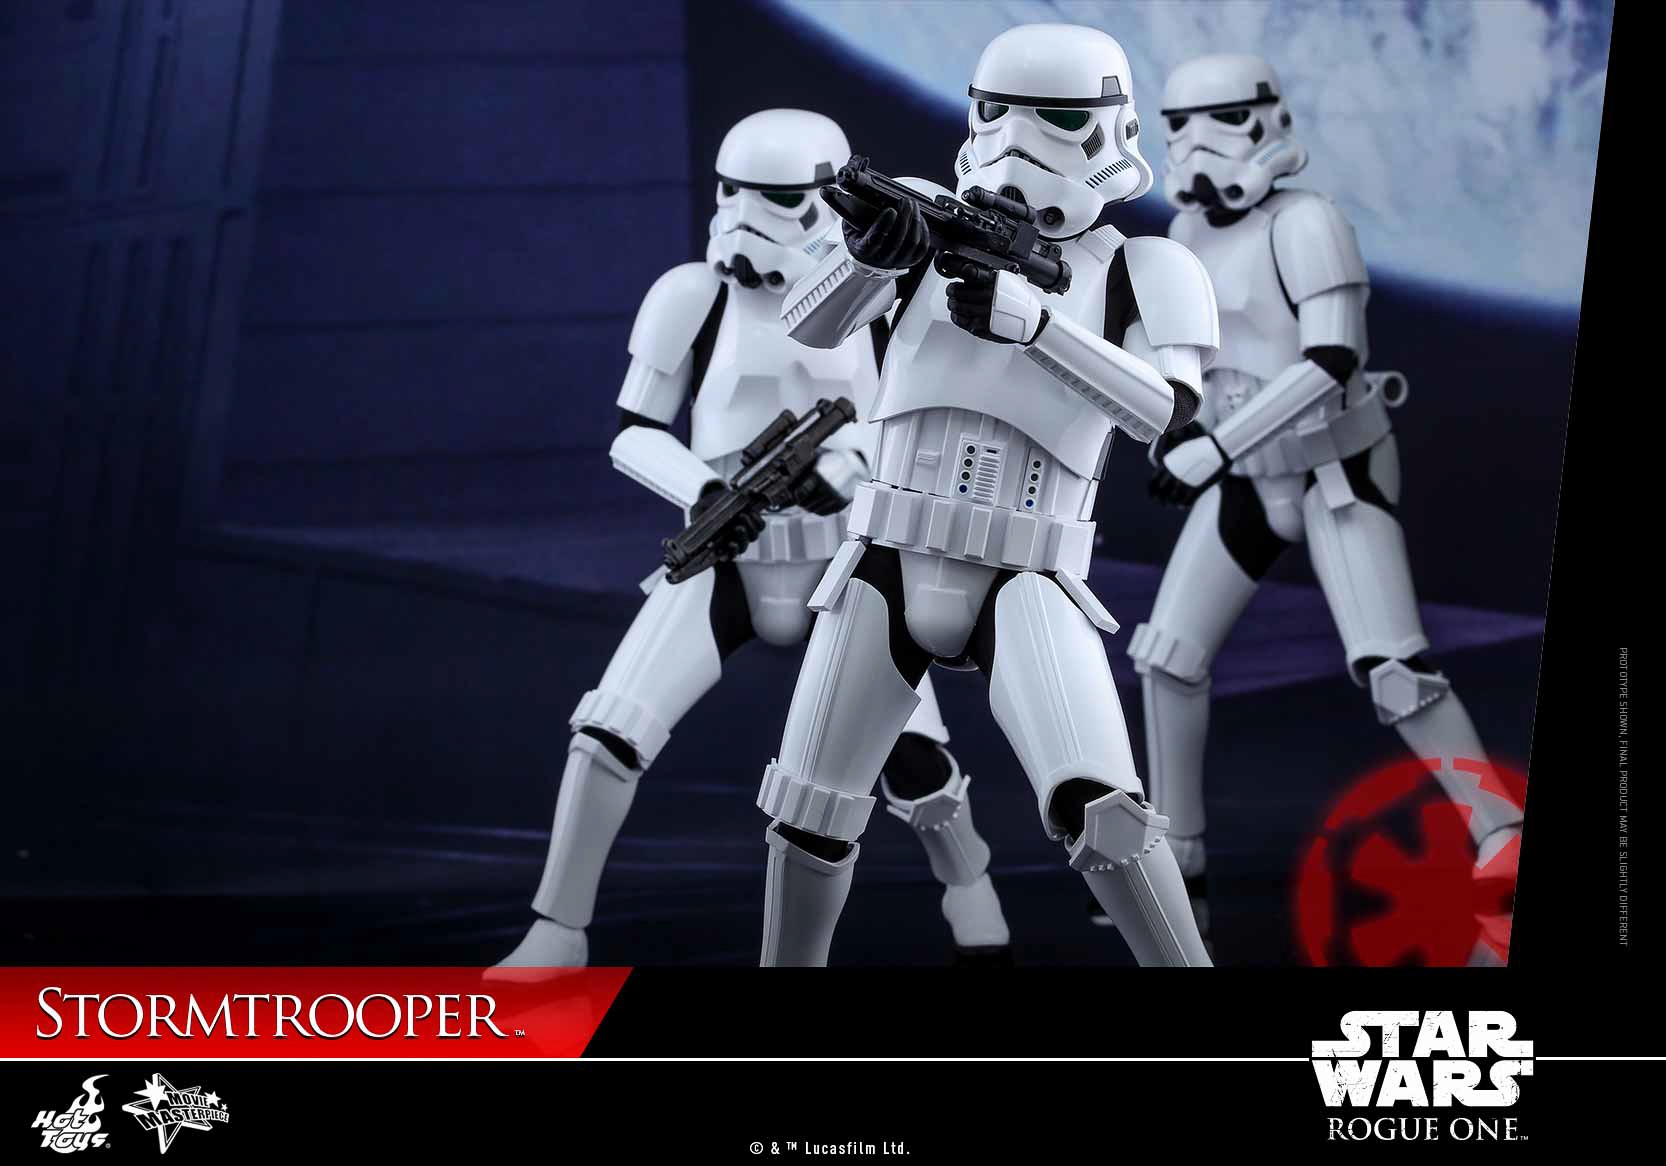 Hot-Toys-MMS393-Rogue-One-Stormtrooper-004.jpg